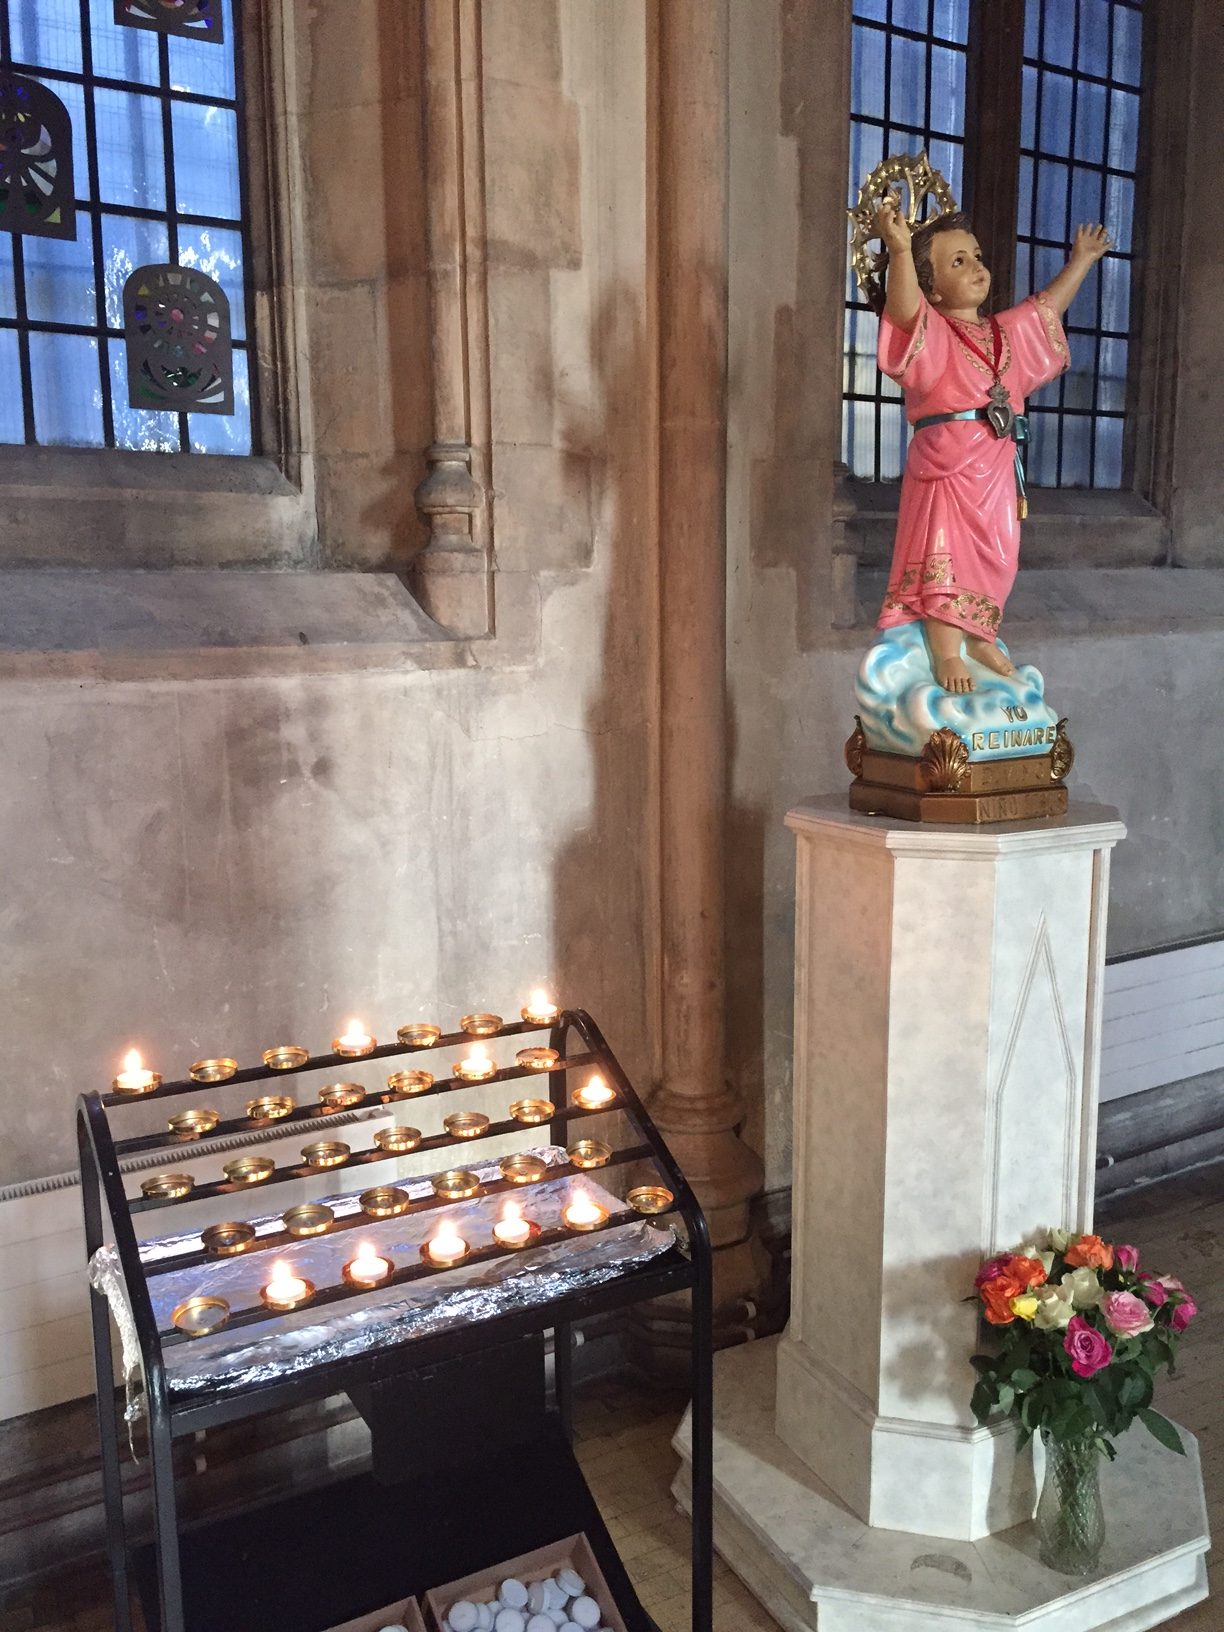 London Transport Museum. Lighting a Candle for Diddley: St George's Cathedral, Southwark.